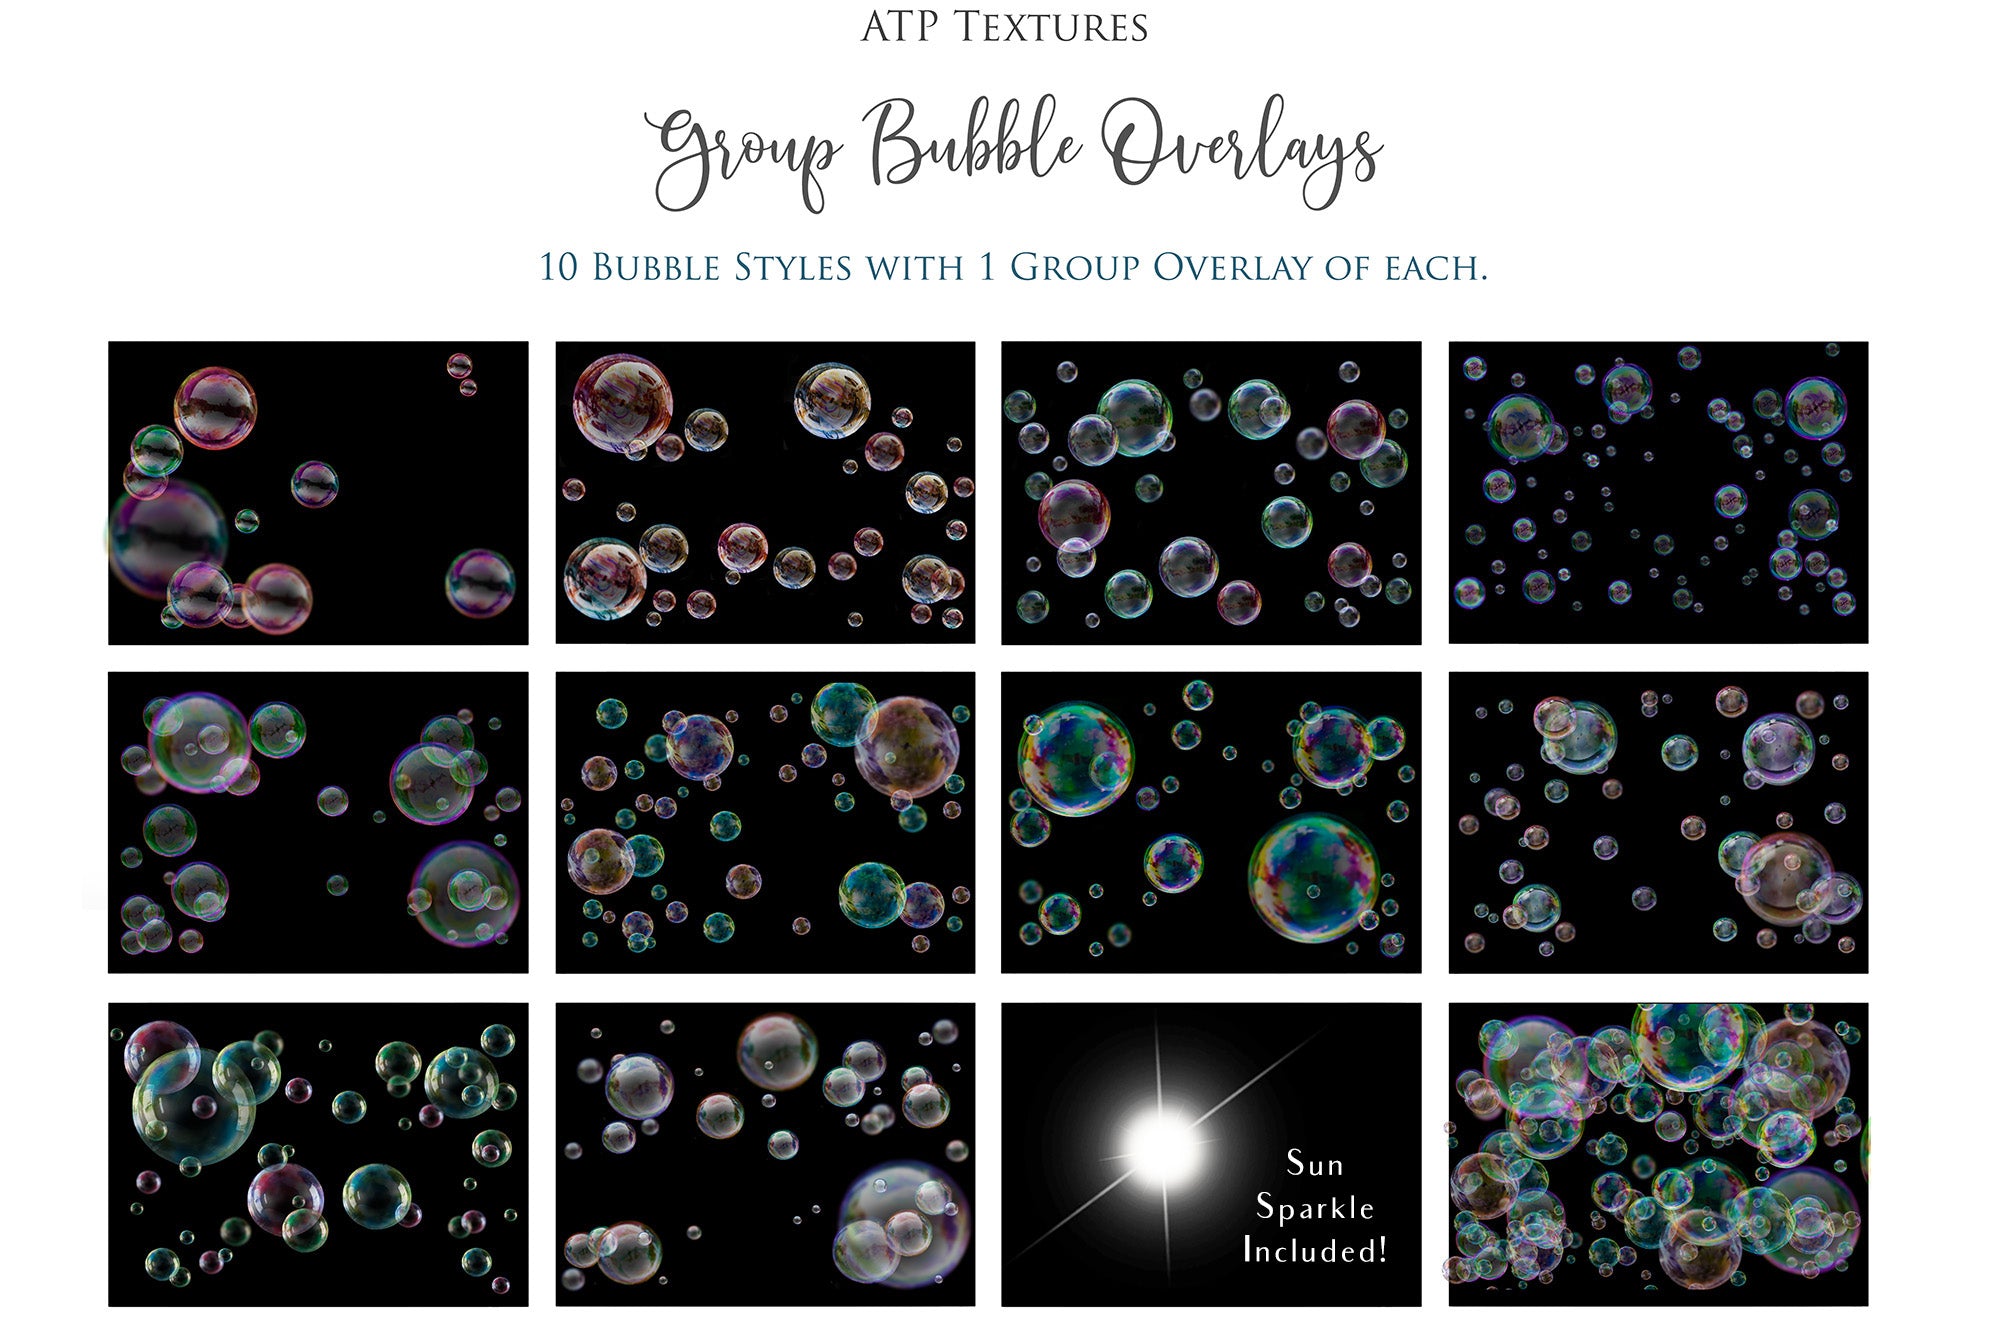 Png Soap Bubble Overlays for photography edits. Transparent files for digital download. The Best quality, high resolution, realistic photo graphic assets. Fine more products at ATP Textures store.